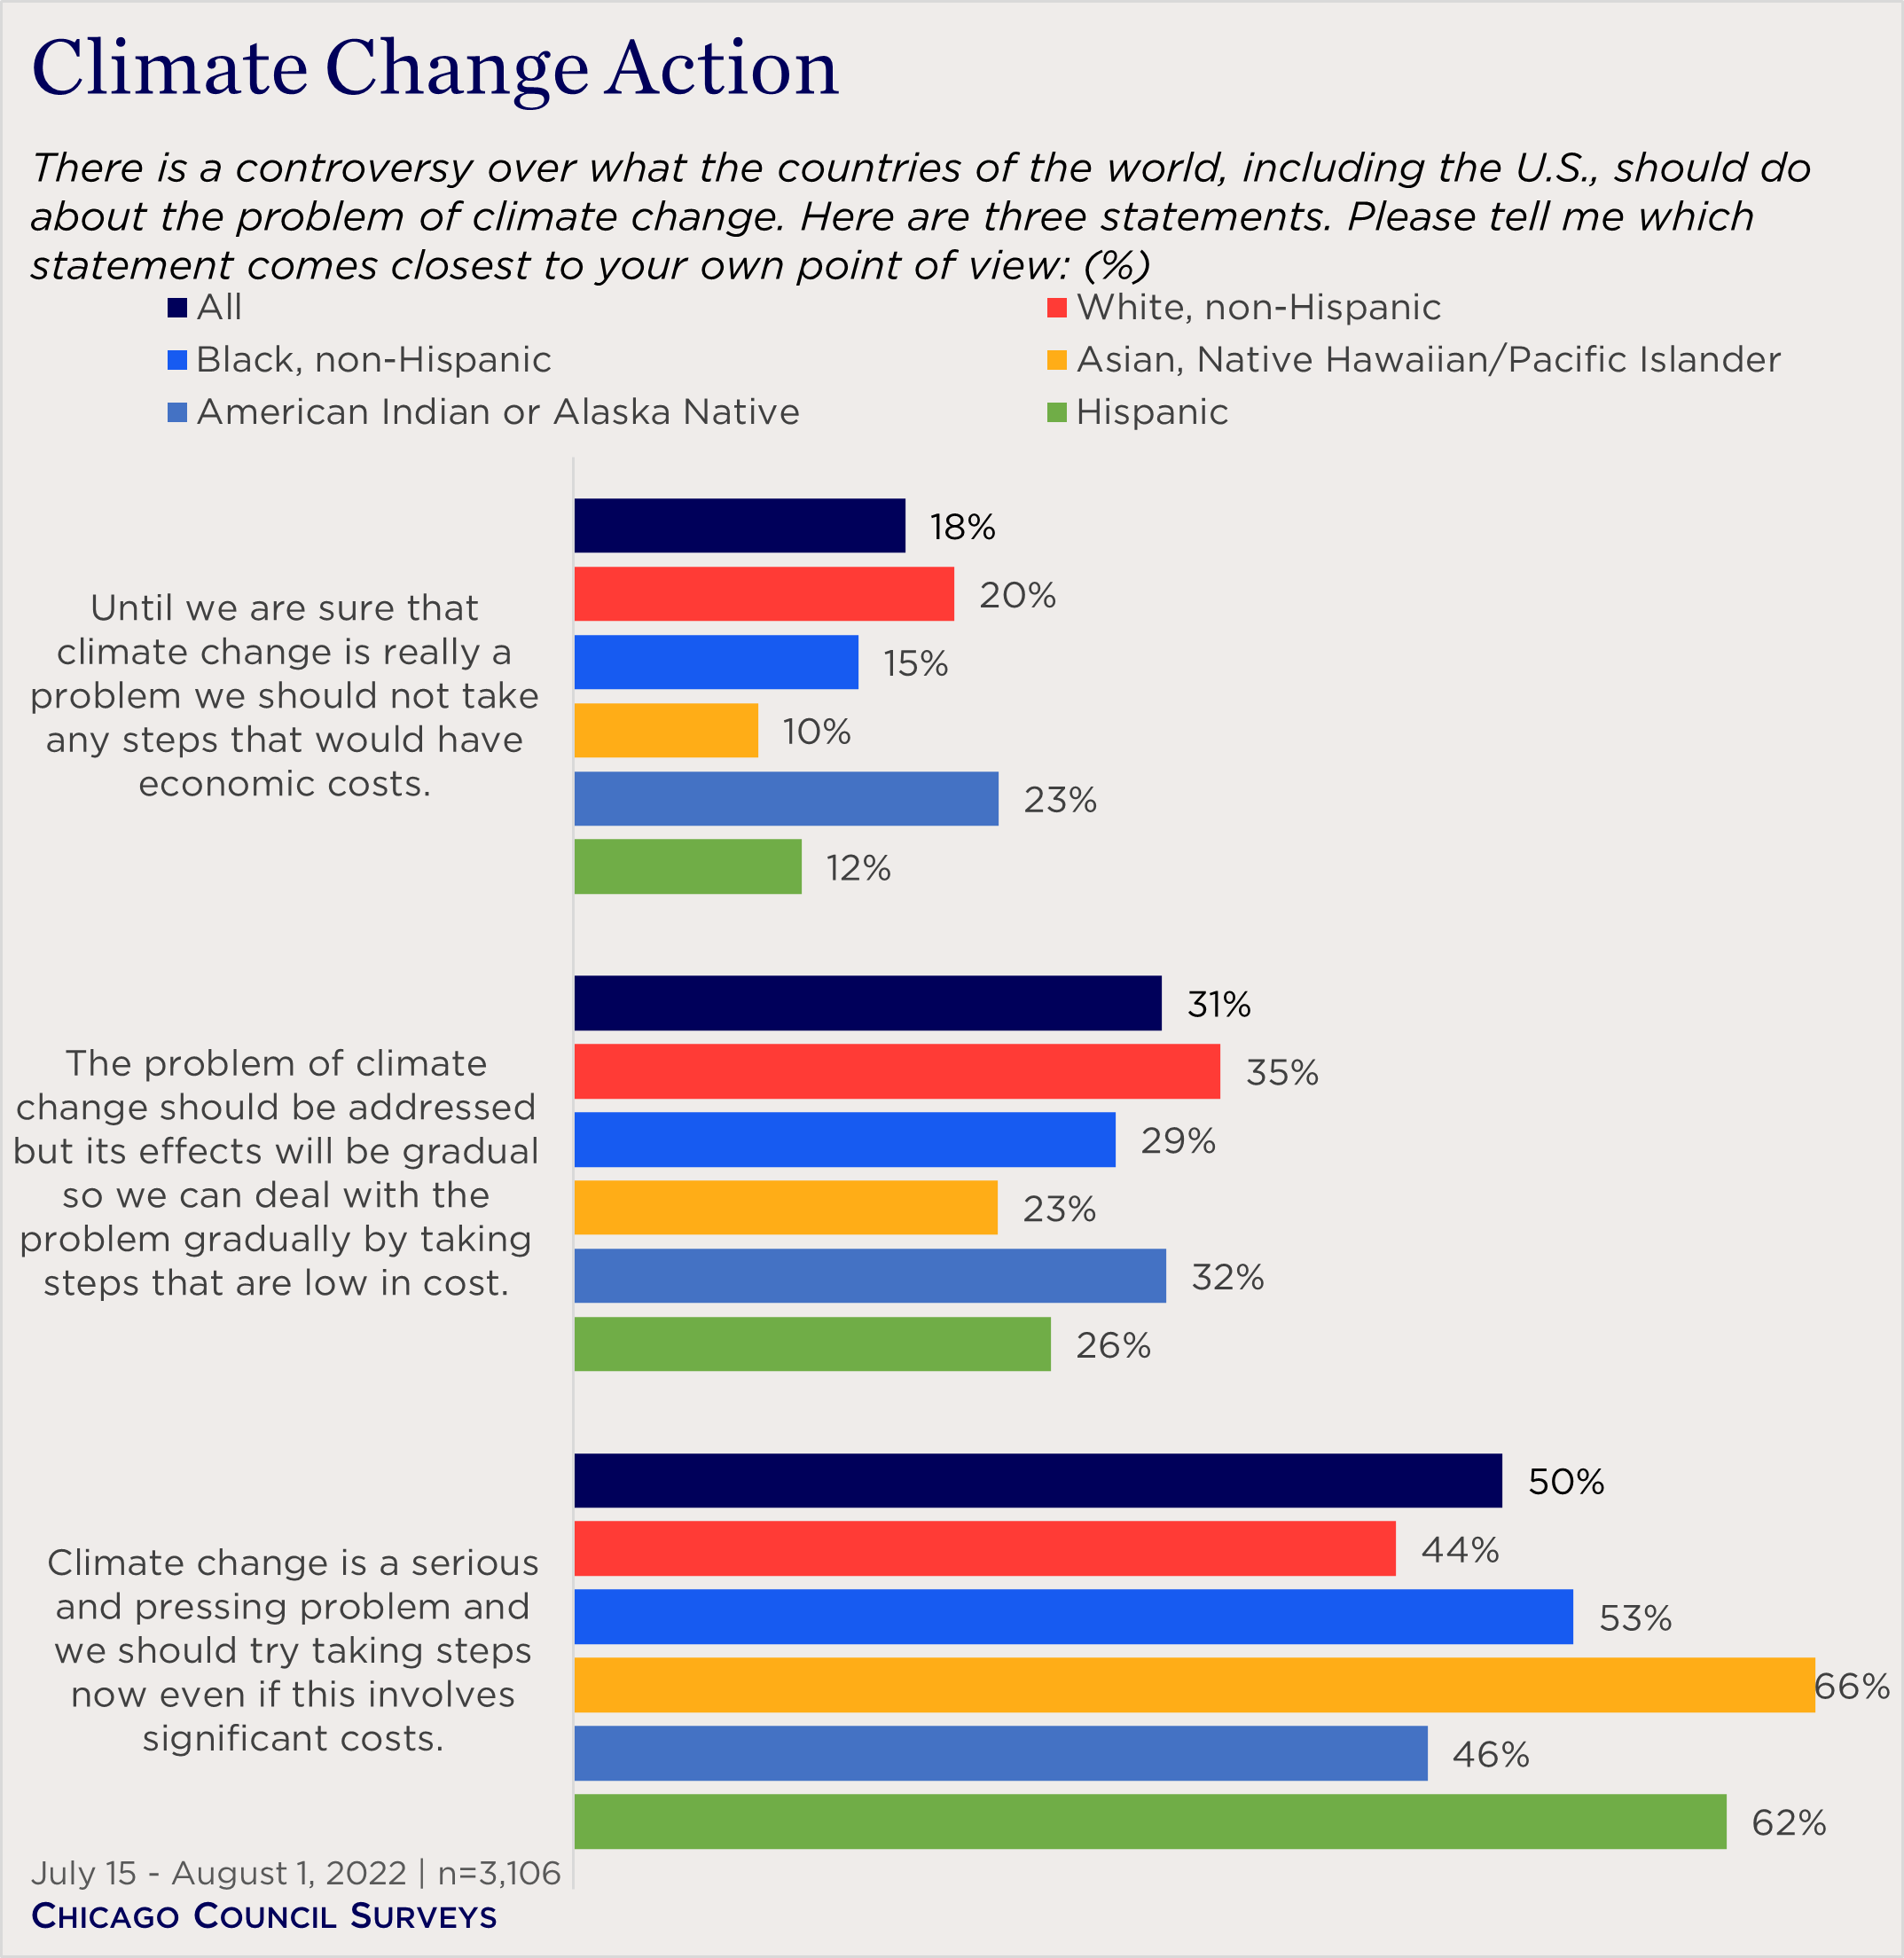 "bar chart showing views on climate change action by race"